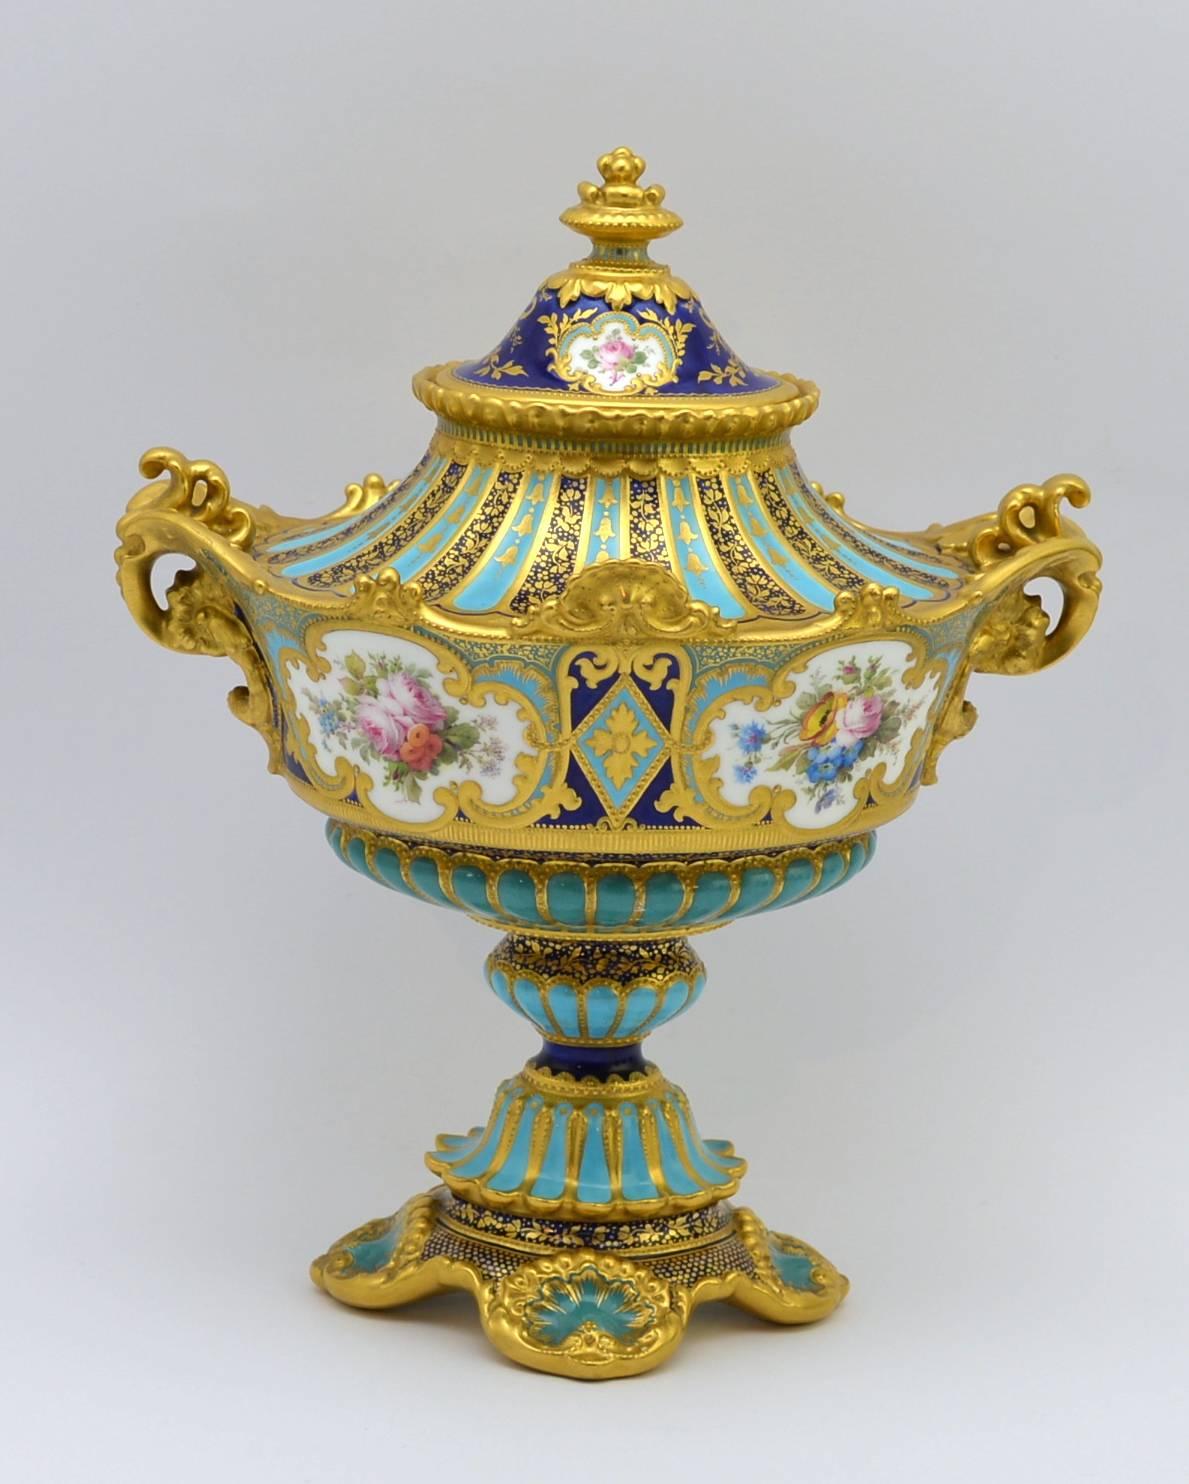 A fine and rare Royal Crown Derby vase, of unusually large size, the tapering oval body hand-painted with four quadrilobate reserves framed in raised and tooled gold, two painted with birds, one of which is signed 'Leroy', the remaining reserves